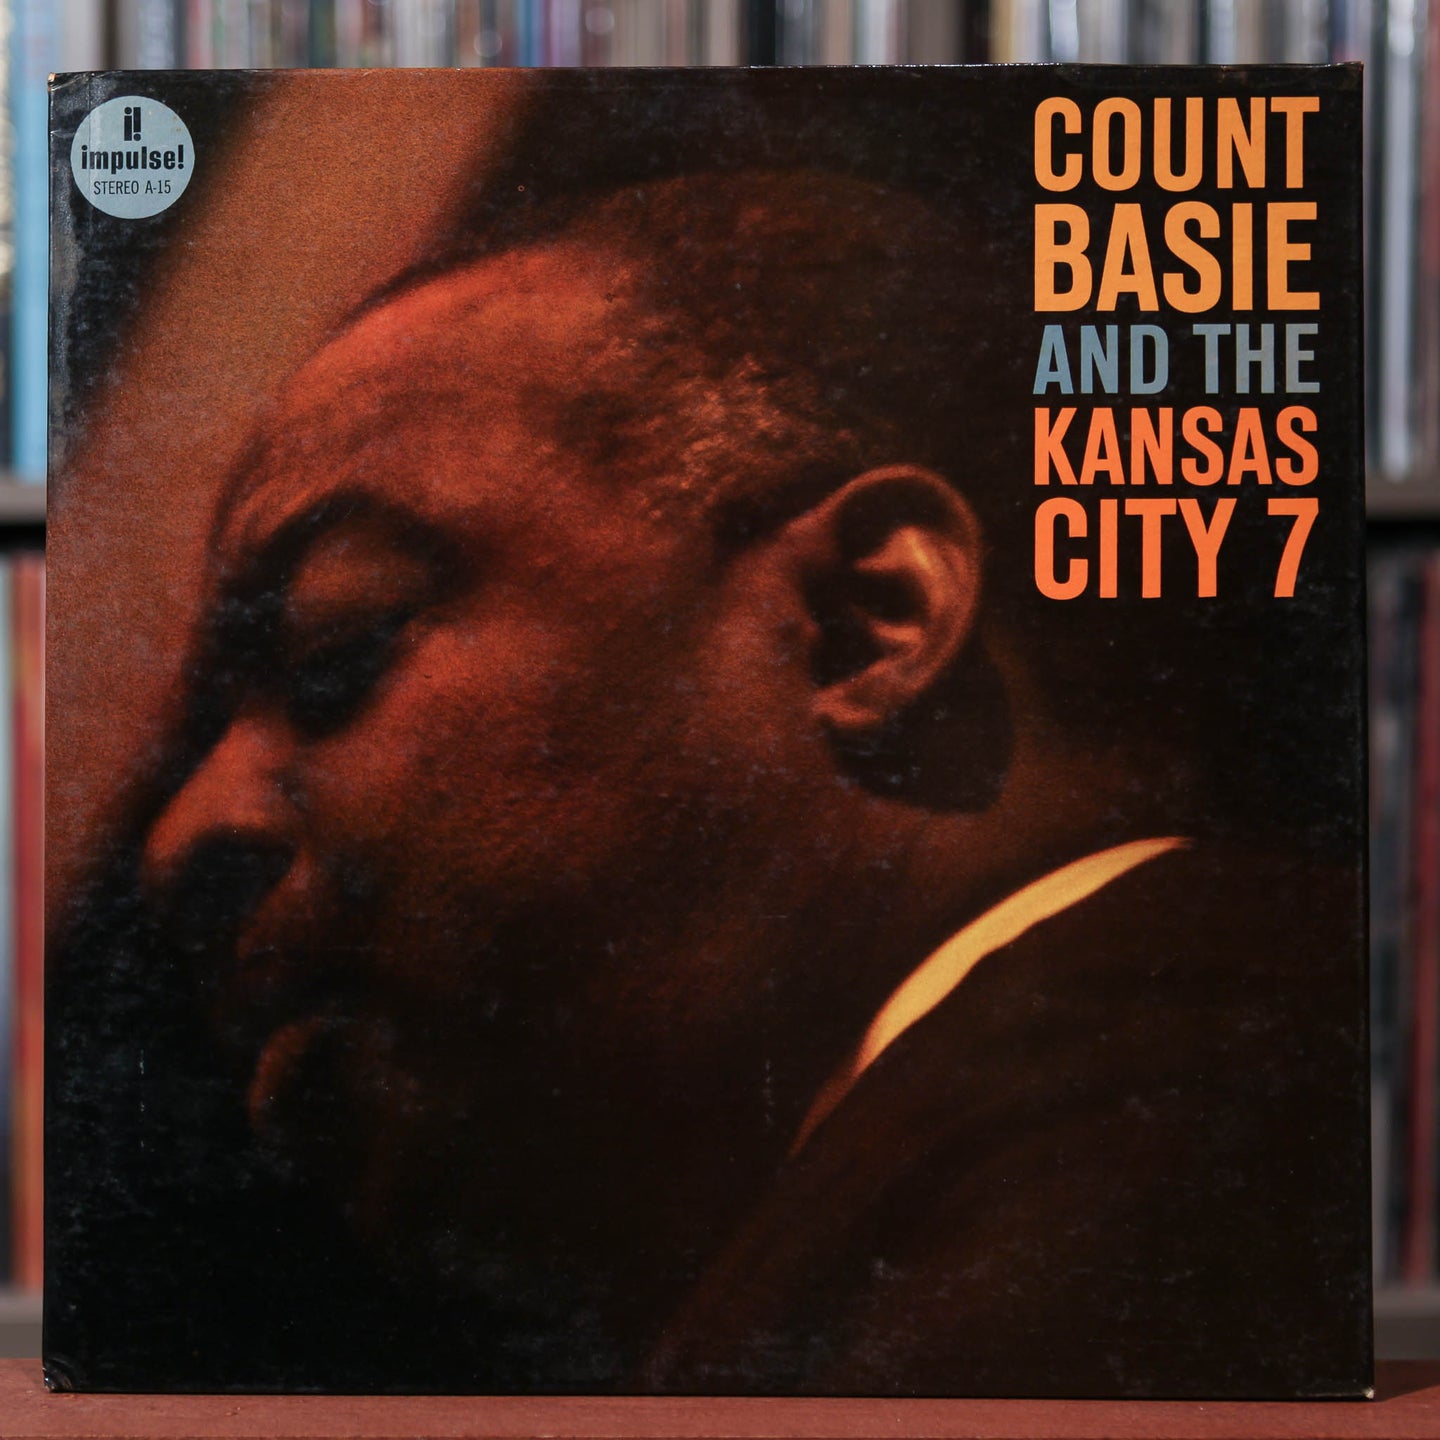 Count Basie And The Kansas City 7 - Self Titled - 1962 Impulse!, VG+/VG